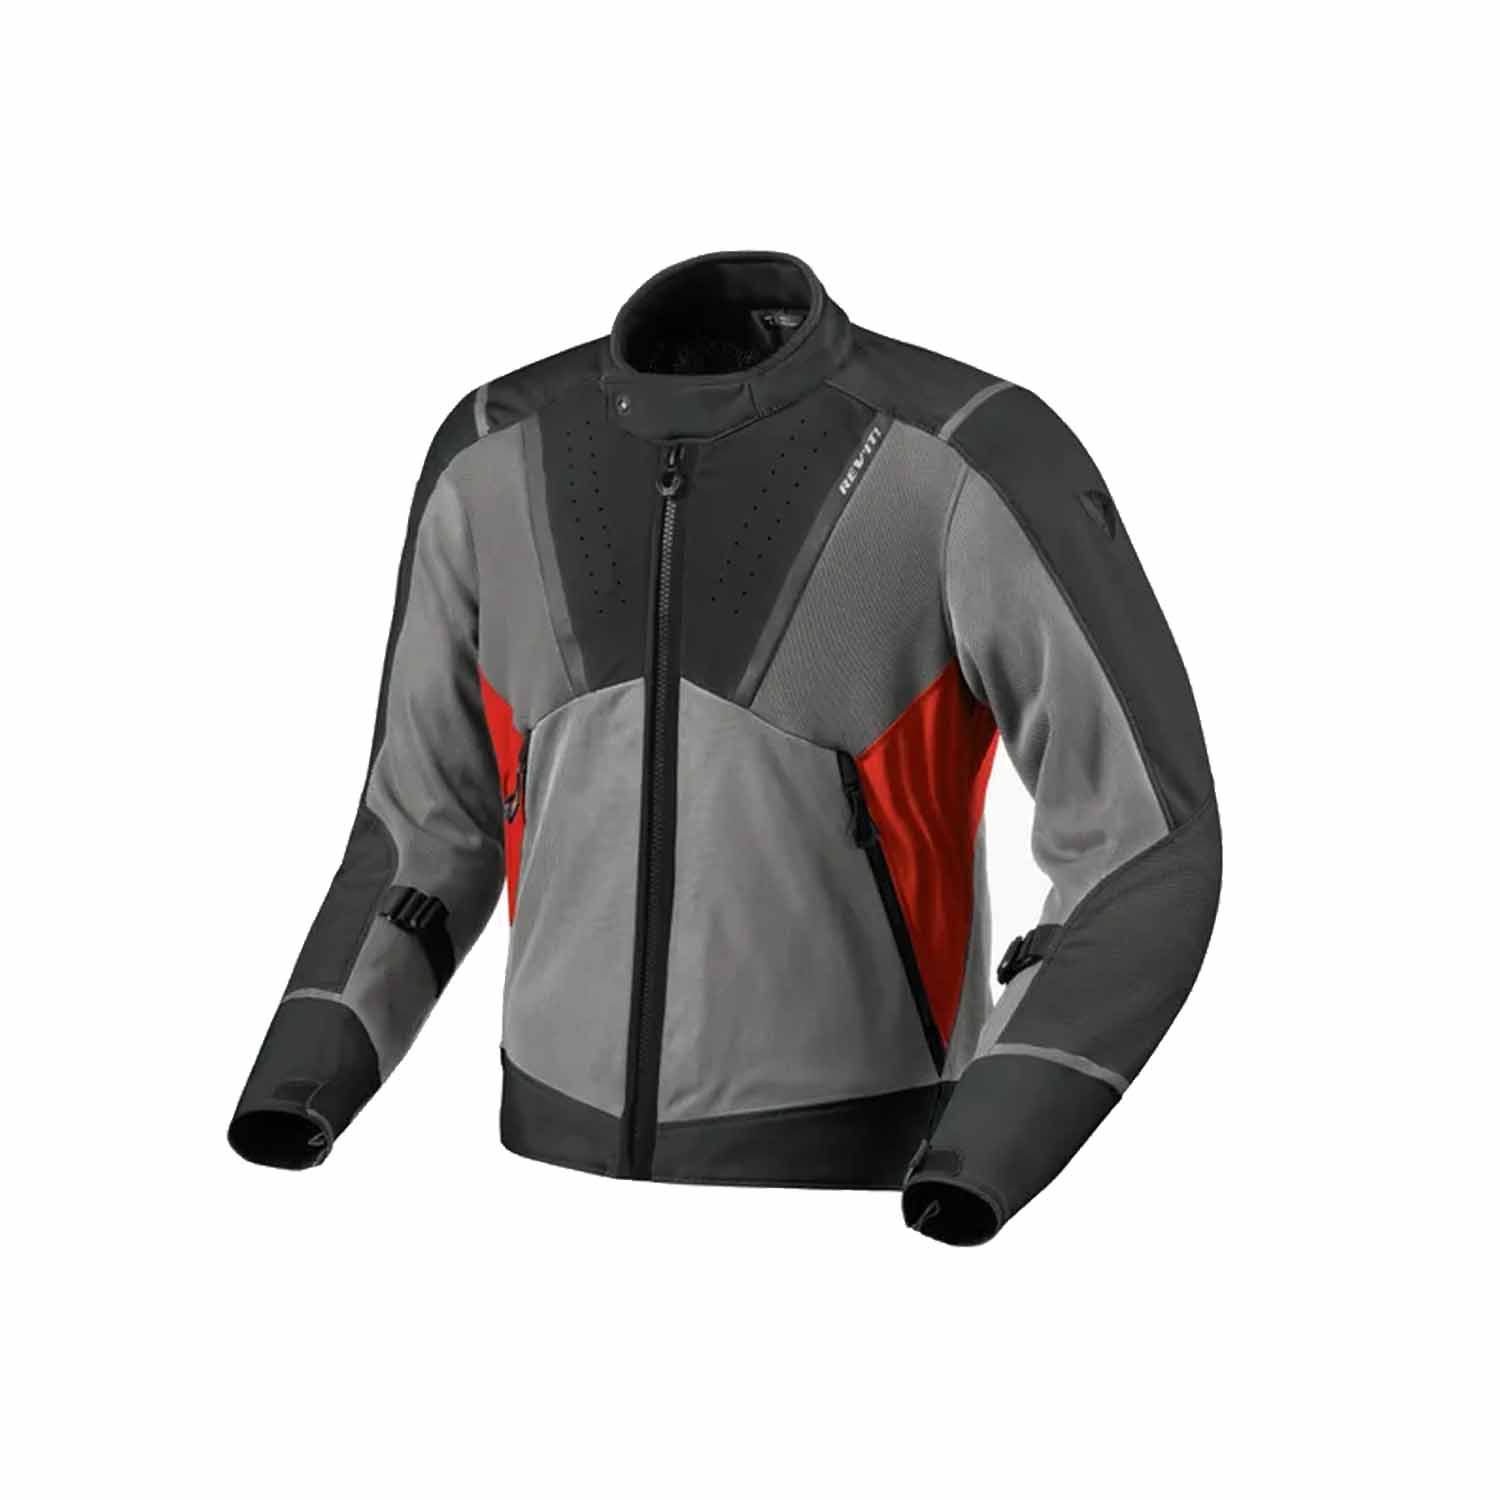 Image of REV'IT! Airwave 4 Jacket Anthracite Red Size 2XL ID 8700001385688